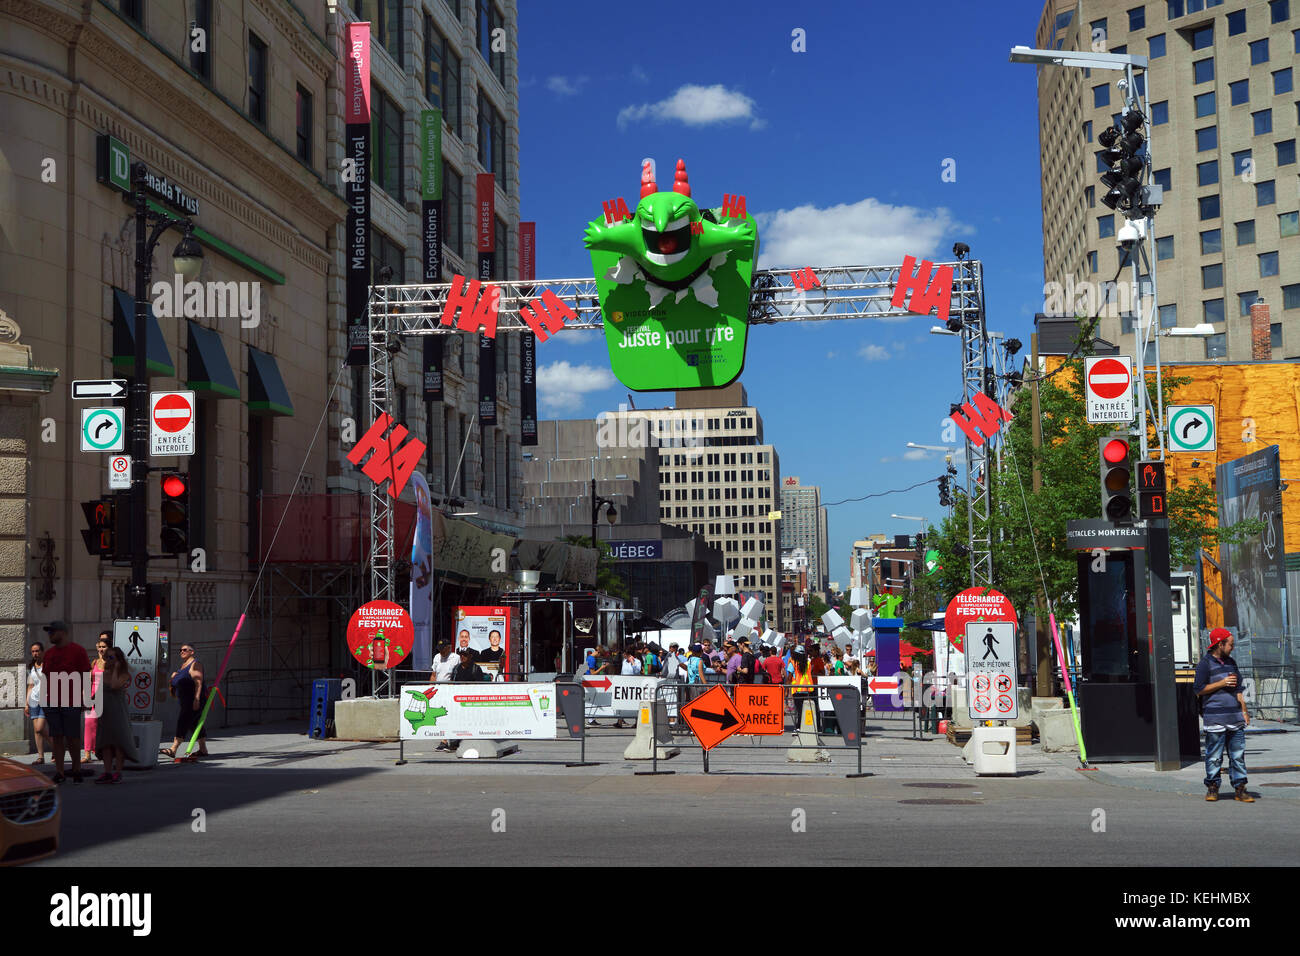 Entrance to the Just for Laughs Festival site on Ste Catherine street, Montreal, province of Quebec, Canada. Stock Photo